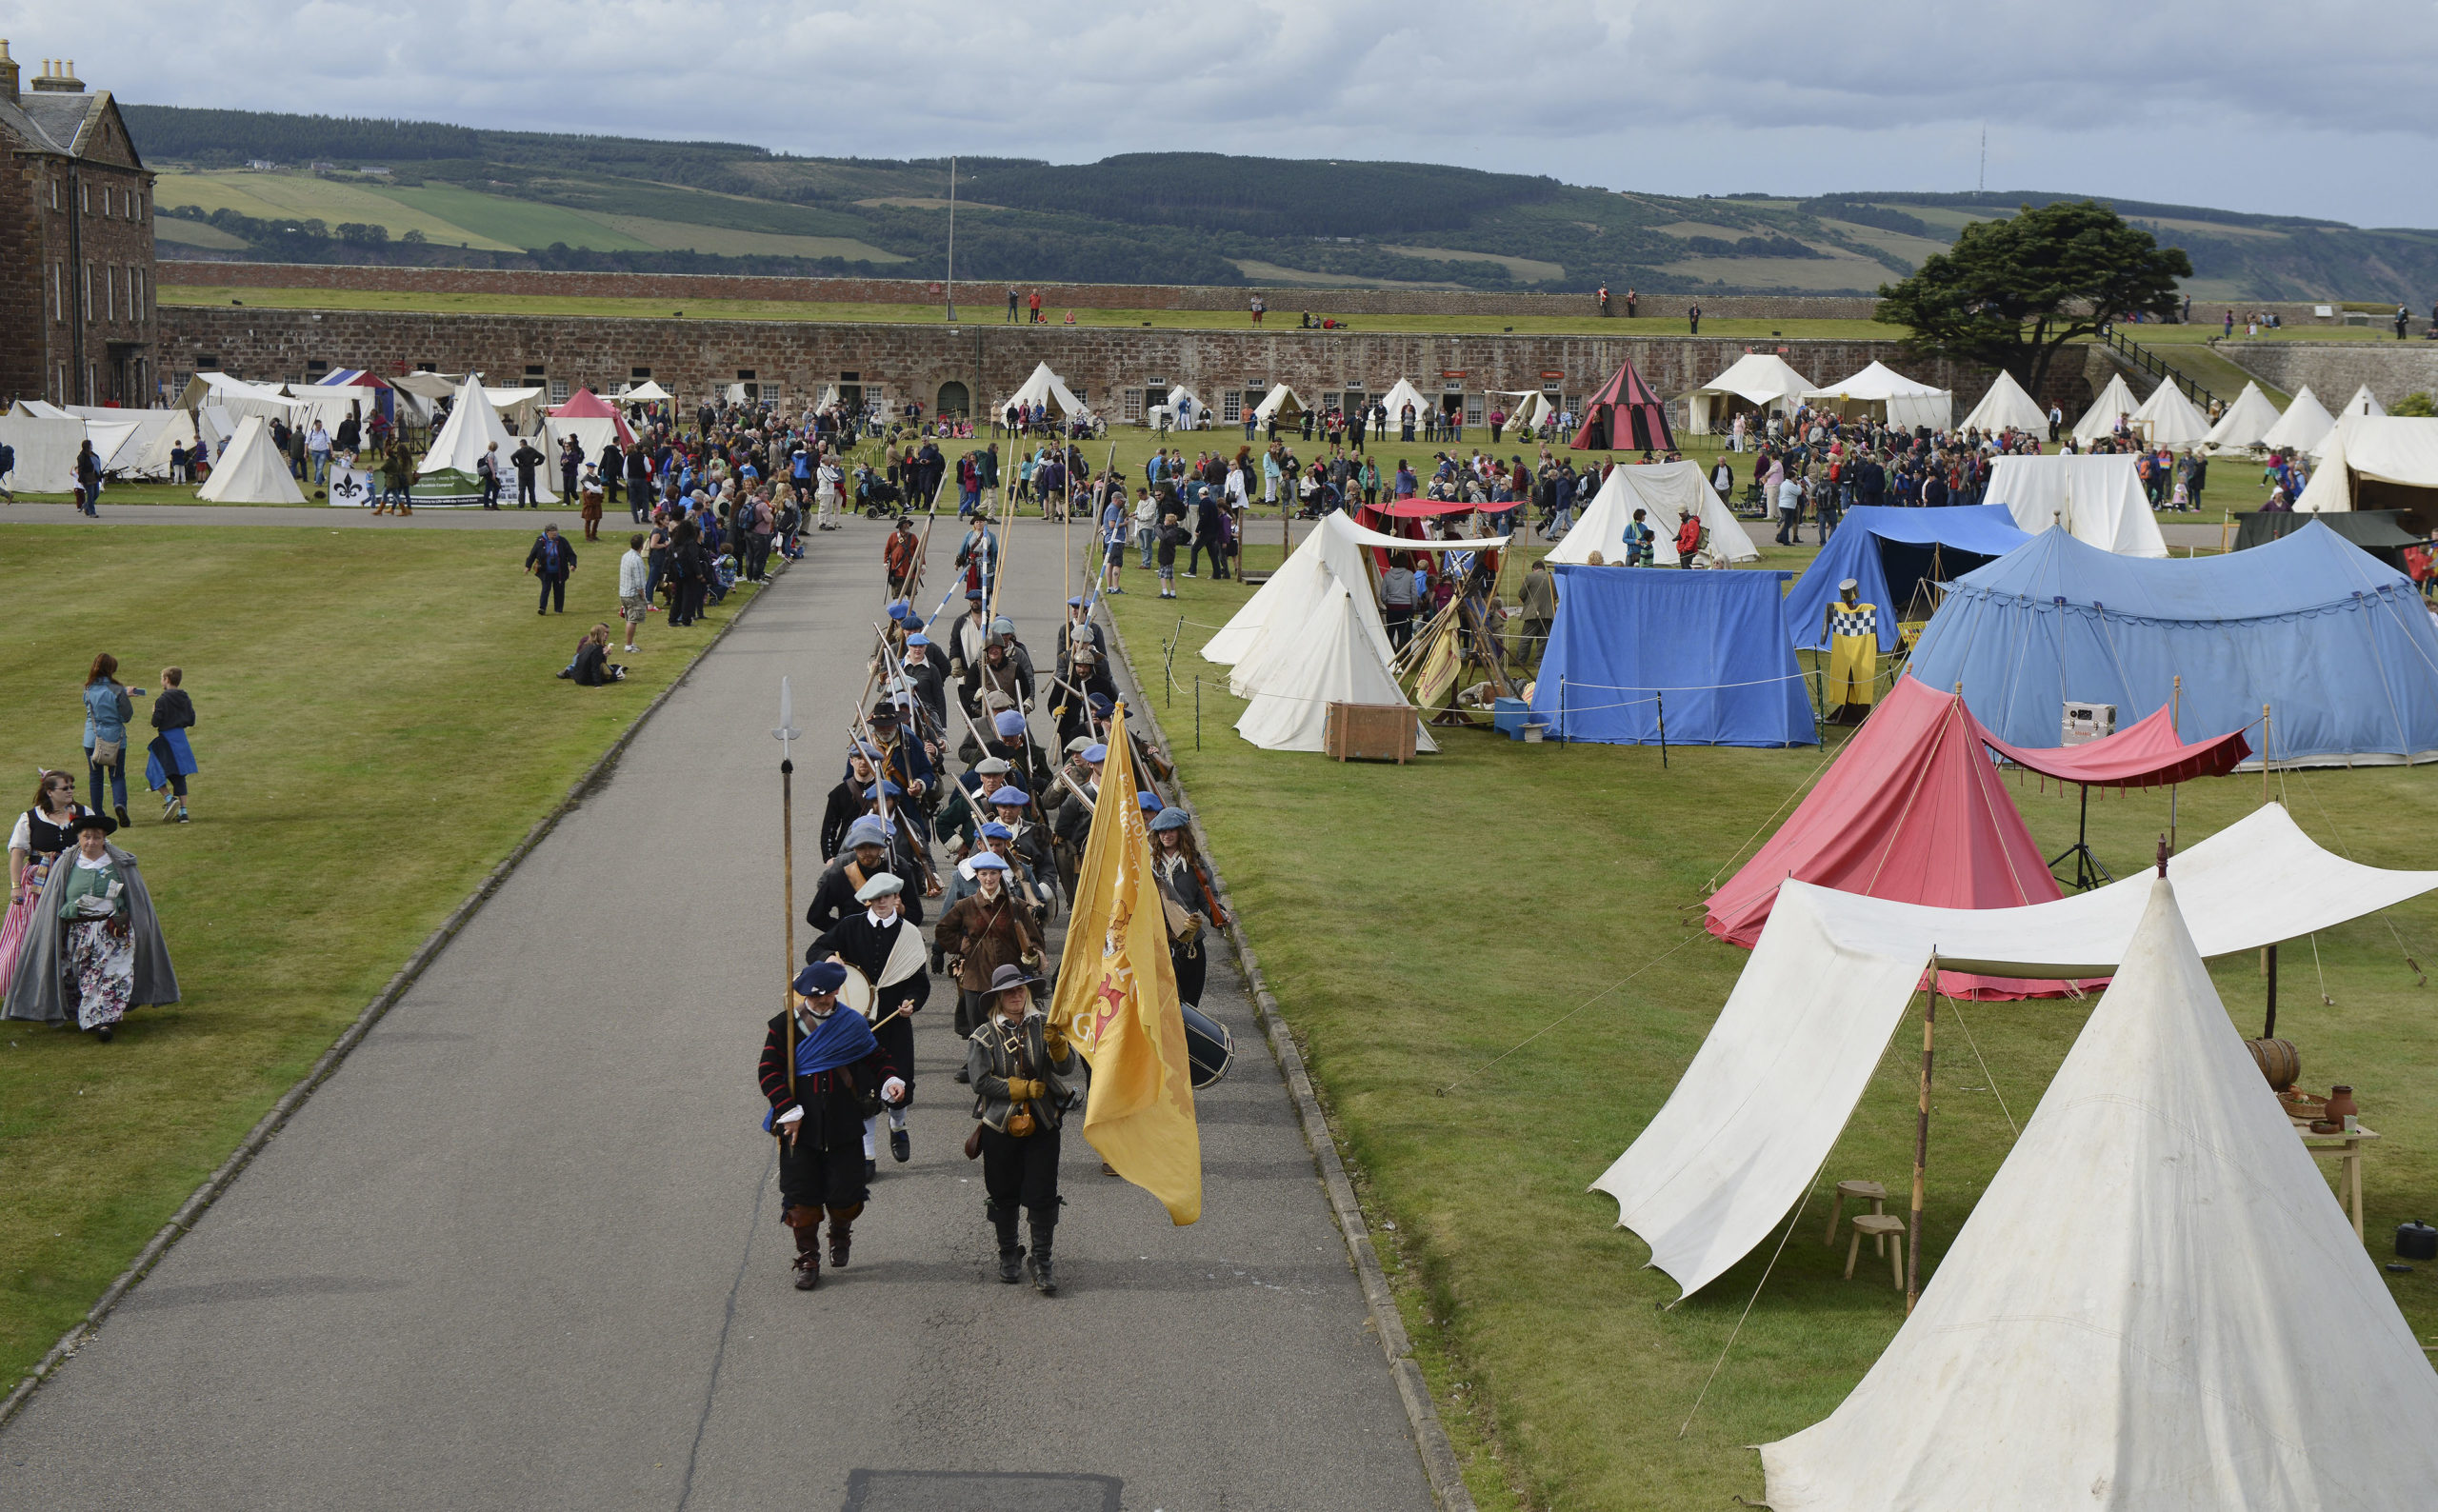 A drone image of people dressed in re-enactment clothing carrying a flag and marching alongside festival tents for Celebration of the Centuries